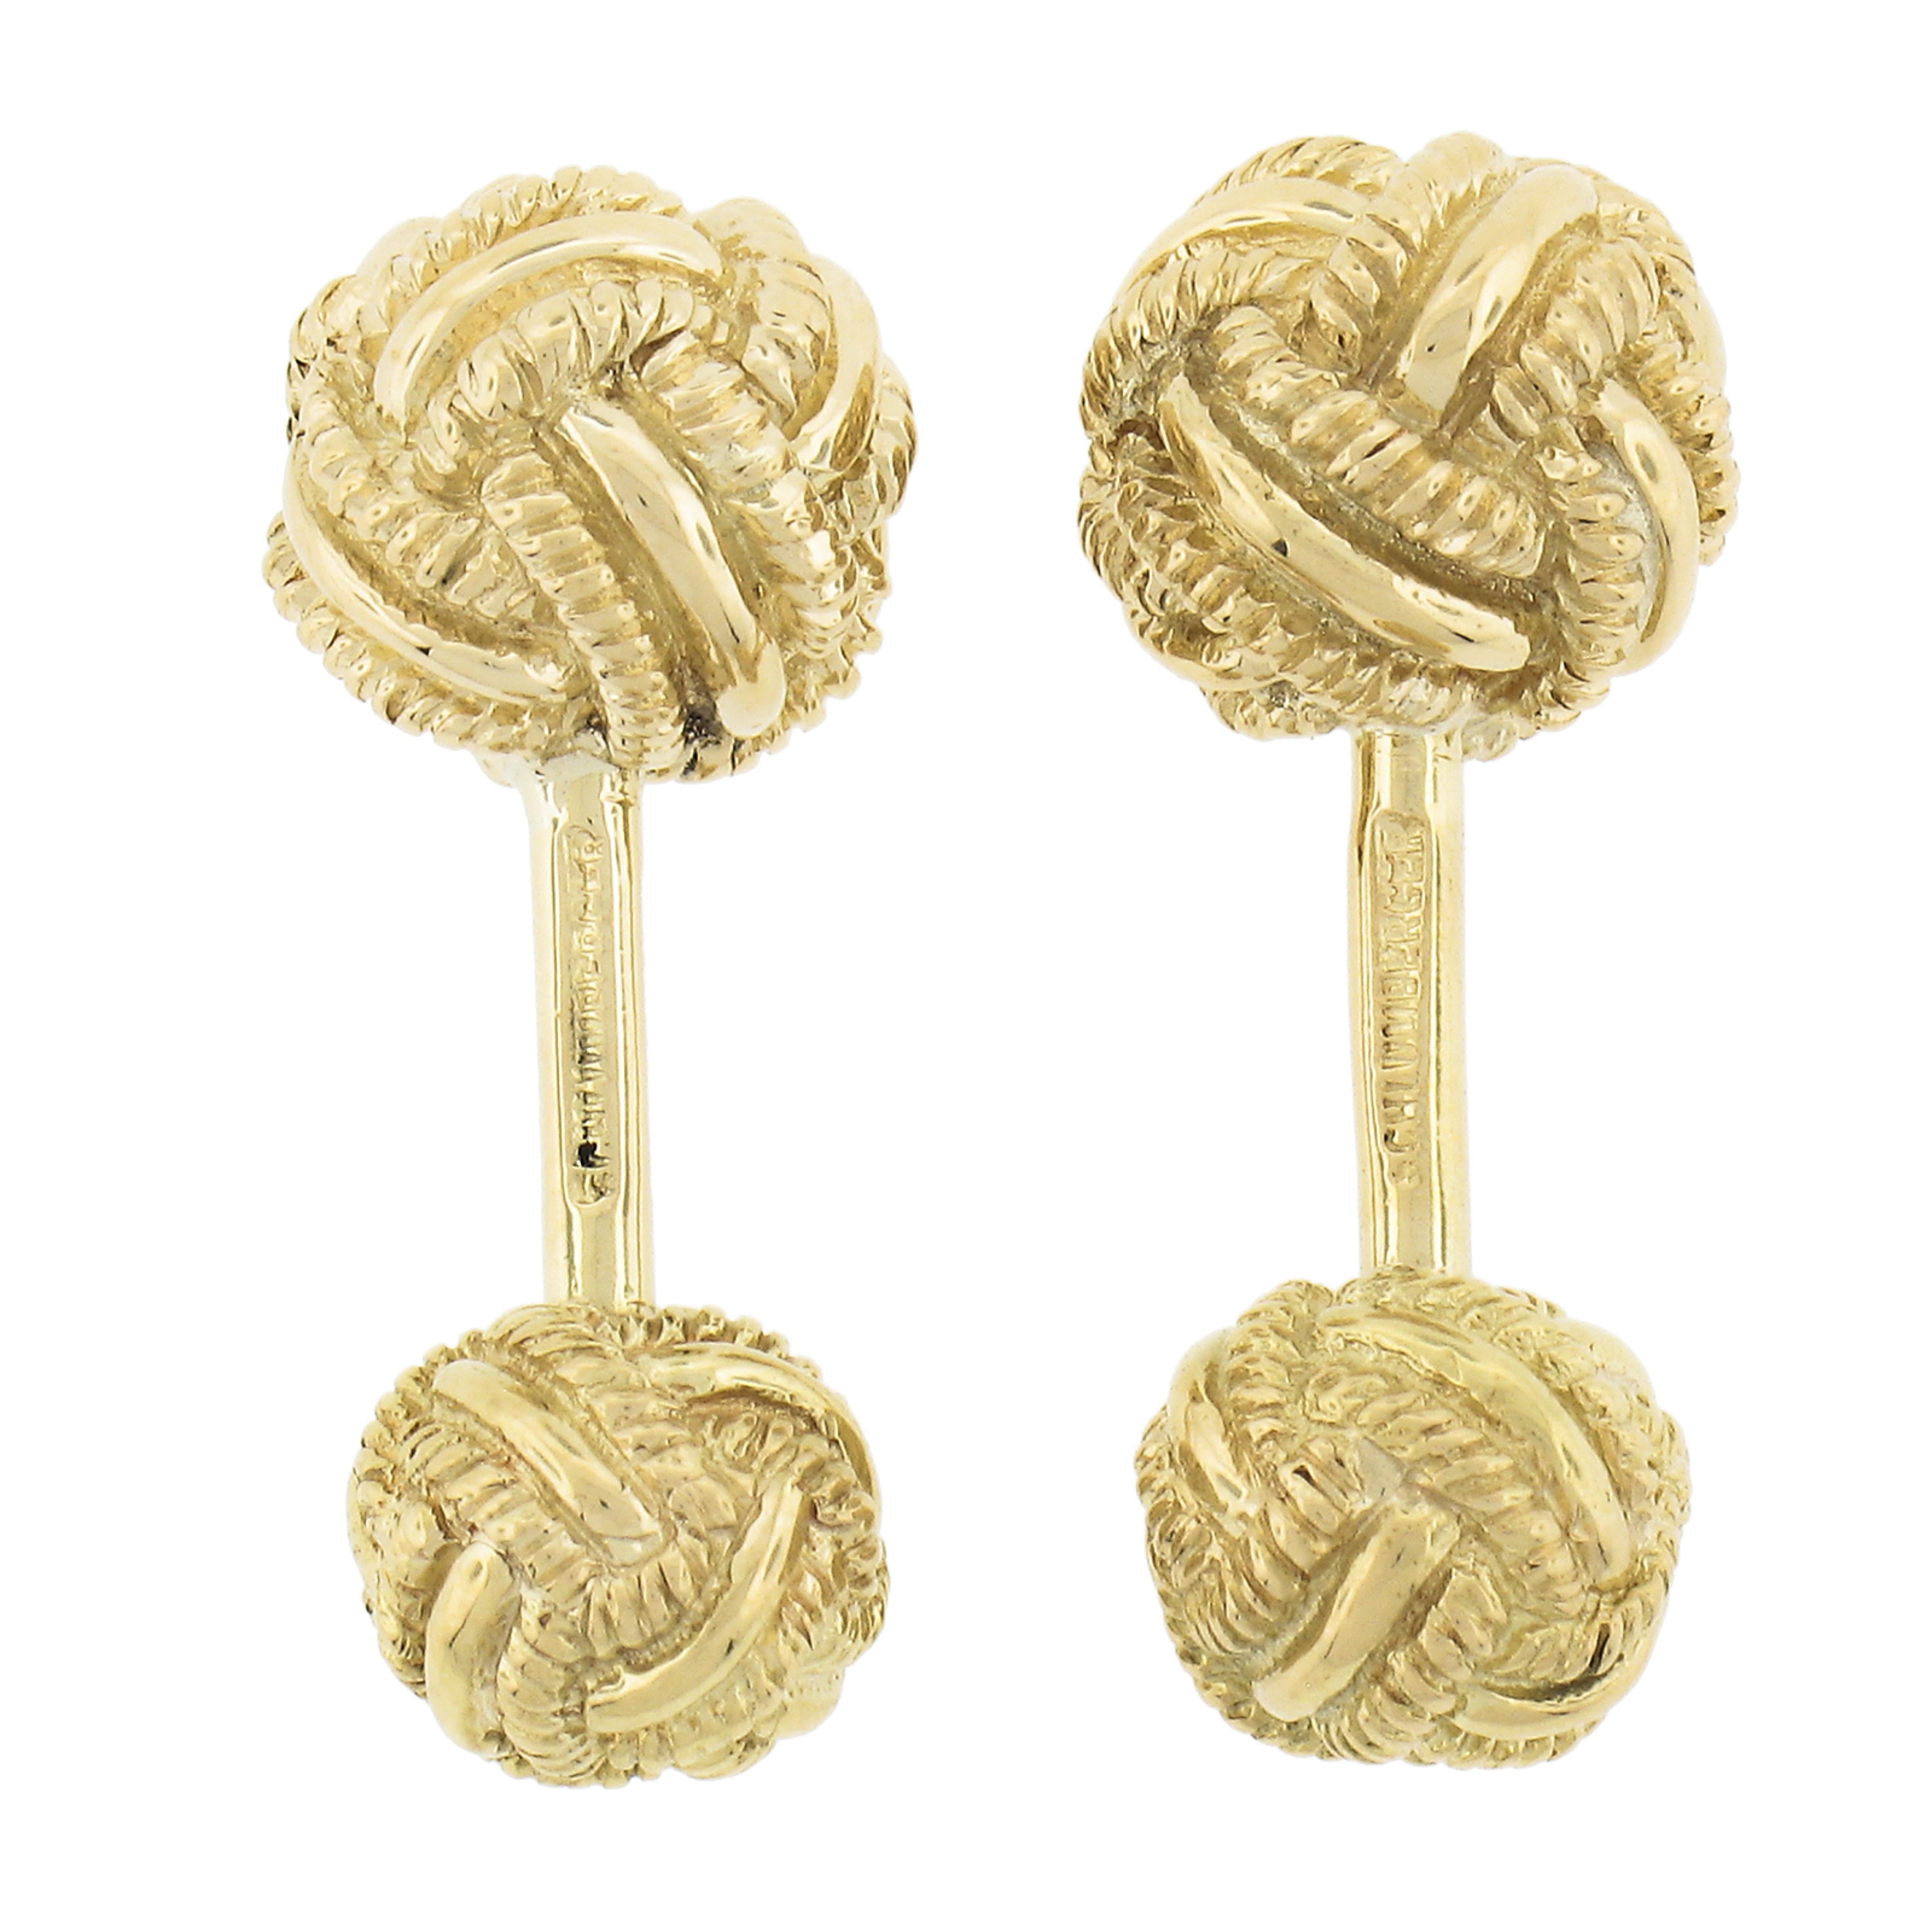 Tiffany & Co. Schlumberger Men's Solid 18k Yellow Gold Woven Knot Cufflinks For Sale 1